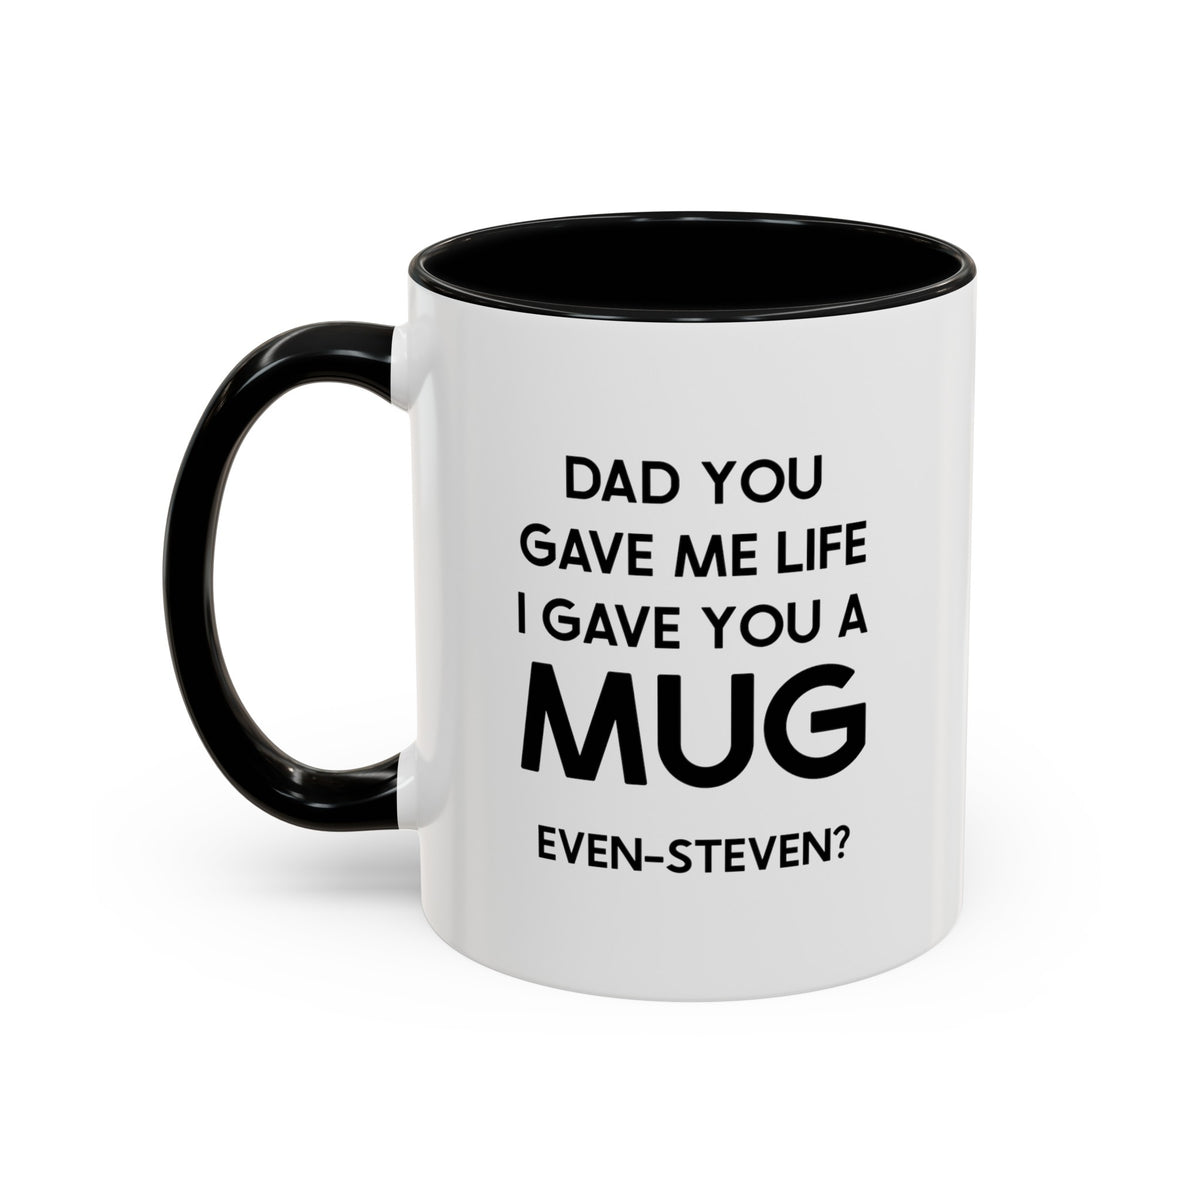 Fathers Day Two Tone Coffee Mug, Dad You Gave Me Life I Gave You A Mug. Even-Steven?, Unique Gifts For Dad From Daughter Son